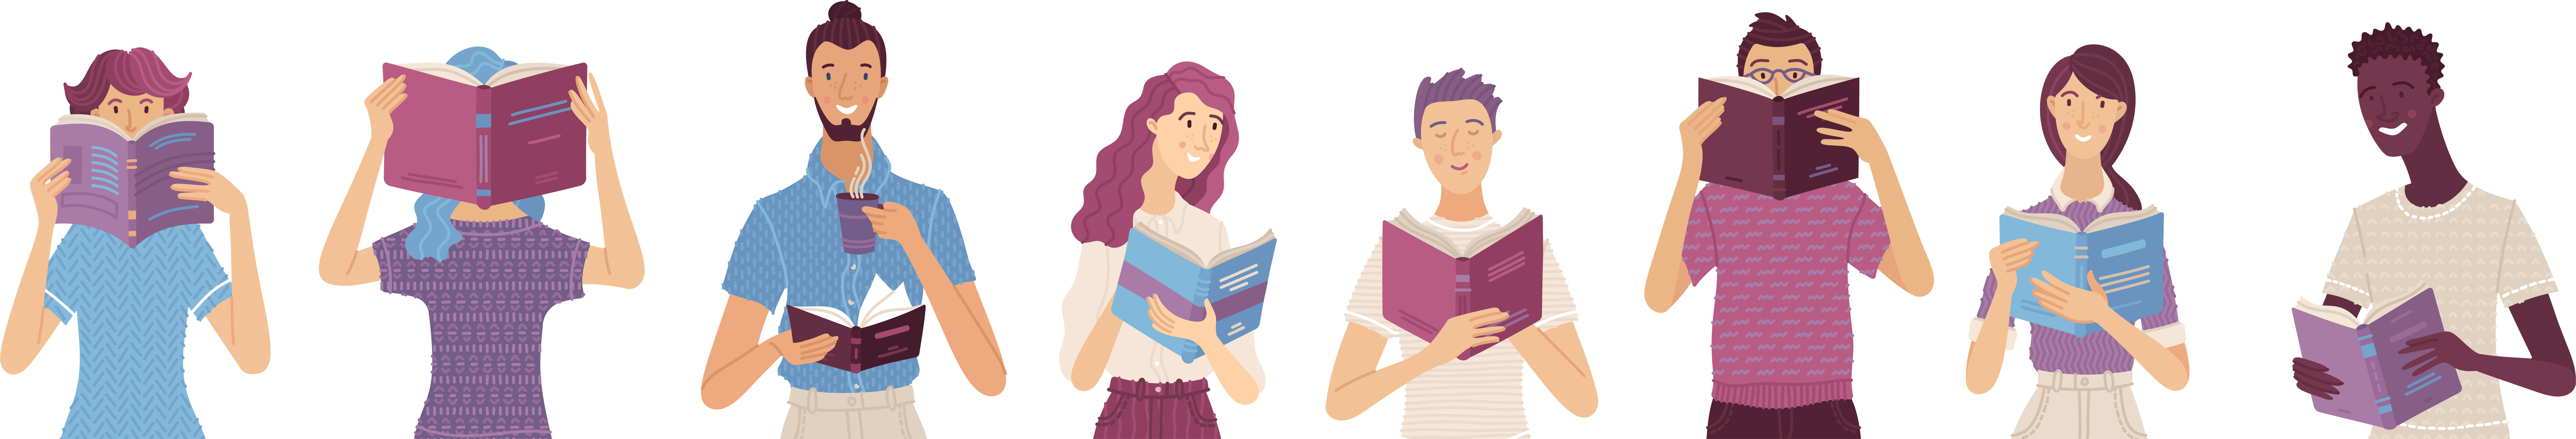 illustration of men and women holding and reading books and smiling